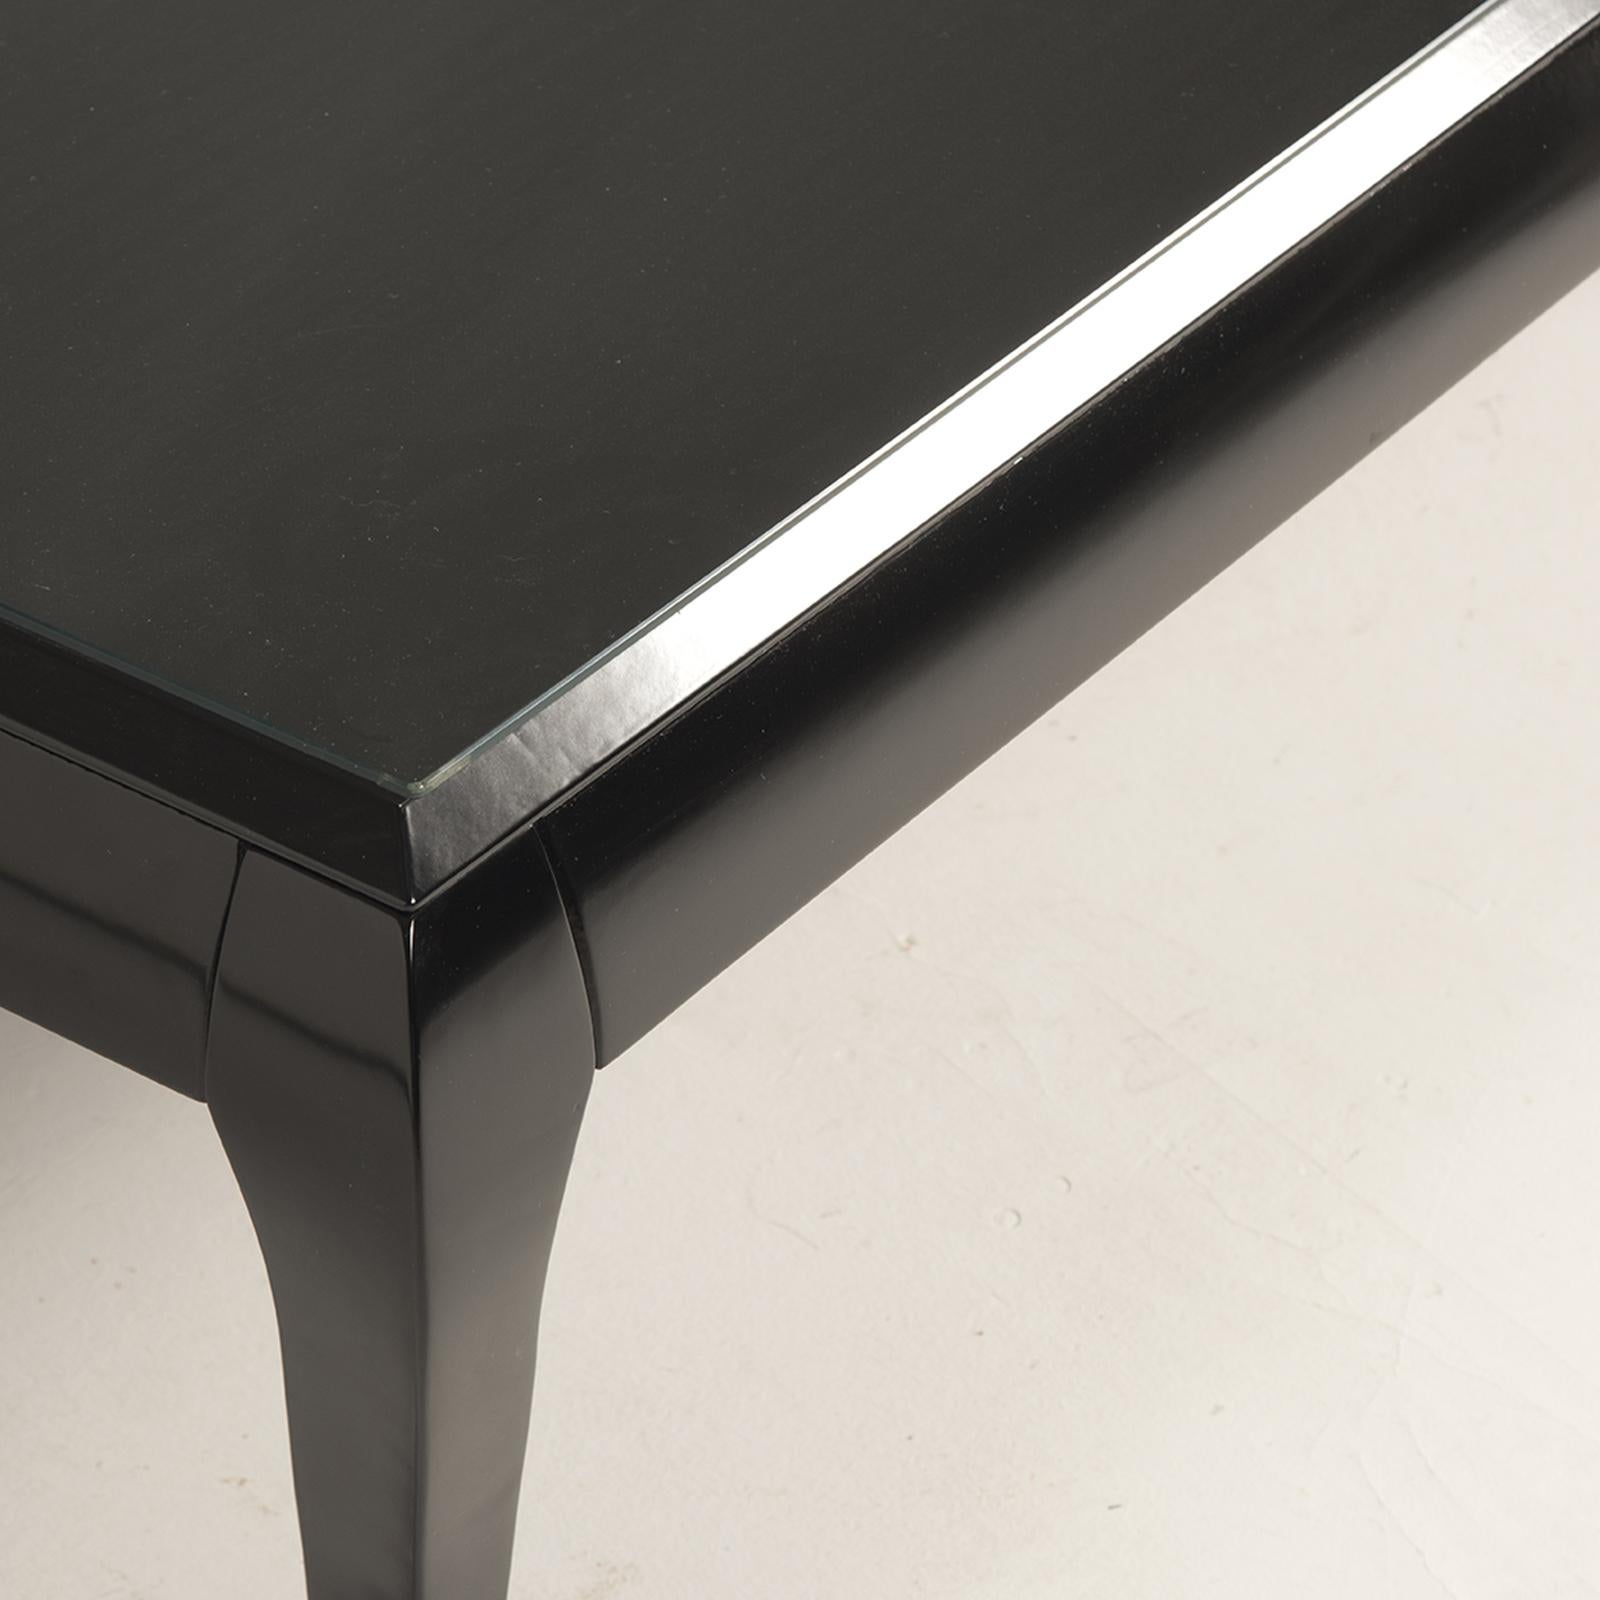 This exquisite coffee table is expertly crafted from solid wood, pairing a rectangular top with elegantly tapered legs. Offering a subtle fusion of modern and traditional styling, its understated design is distinguished by a sleek black lacquered